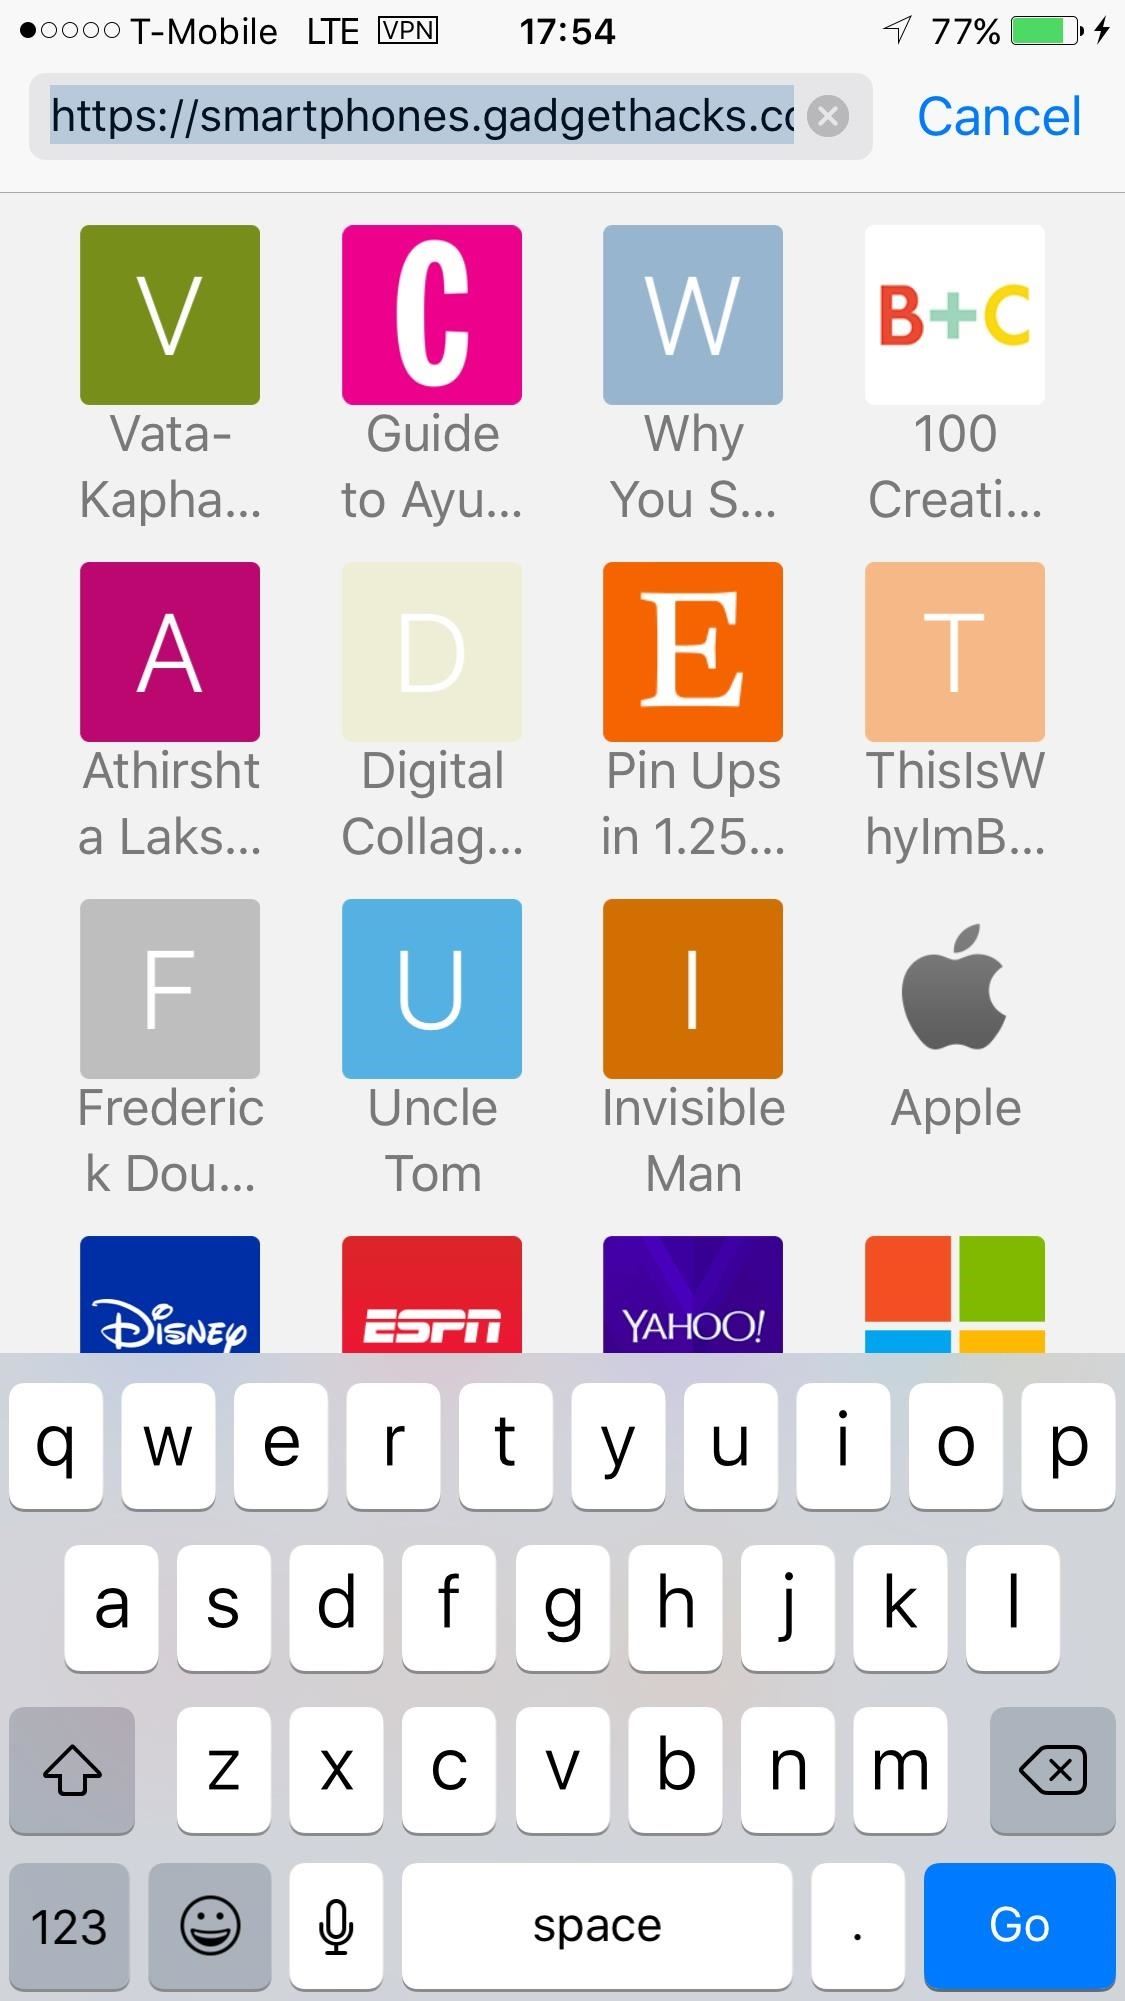 Safari 101: How to Find Specific Words or Phrases in Webpages on Your iPhone